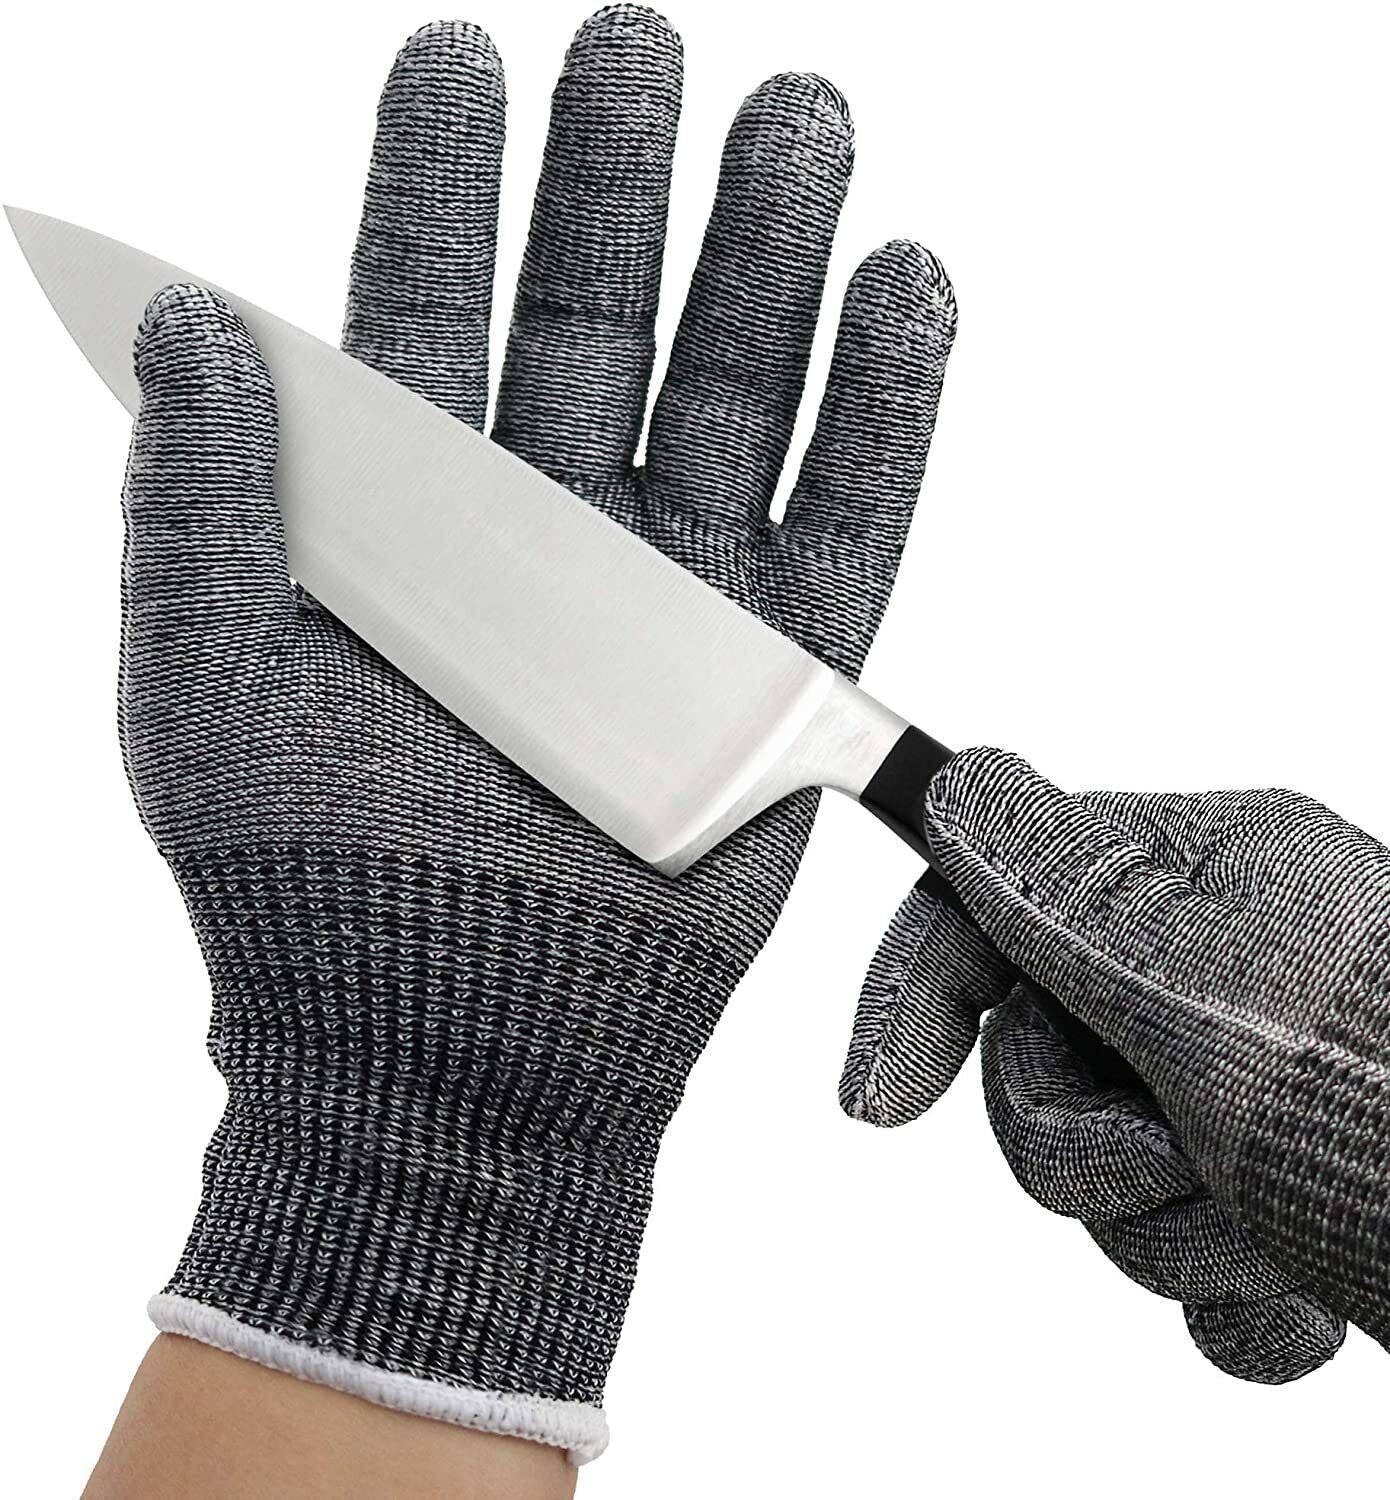 Knife Cut Resistant Nylon, Hand Safety Gloves For Kitchen, Industry, Sharp  Items, Gardening, at Rs 319.00, Safety Gloves